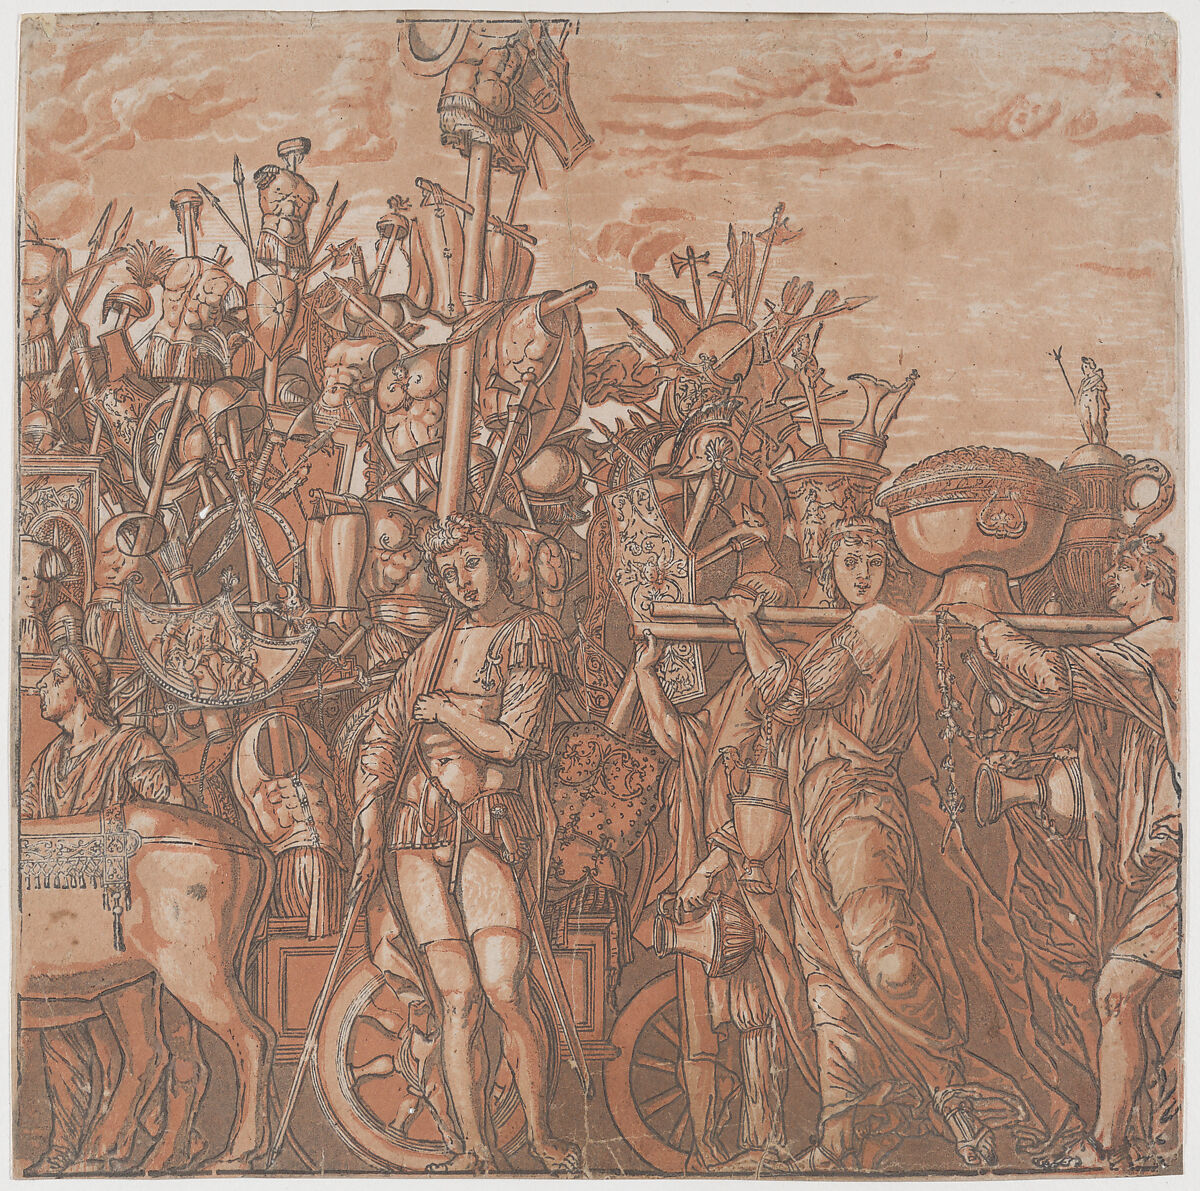 Sheet 3: The trophies of war, from "The Triumph of Julius Caesar", Andrea Andreani (Italian, Mantua 1558/1559–1629), Chiaroscuro woodcut from four blocks printed in pink 